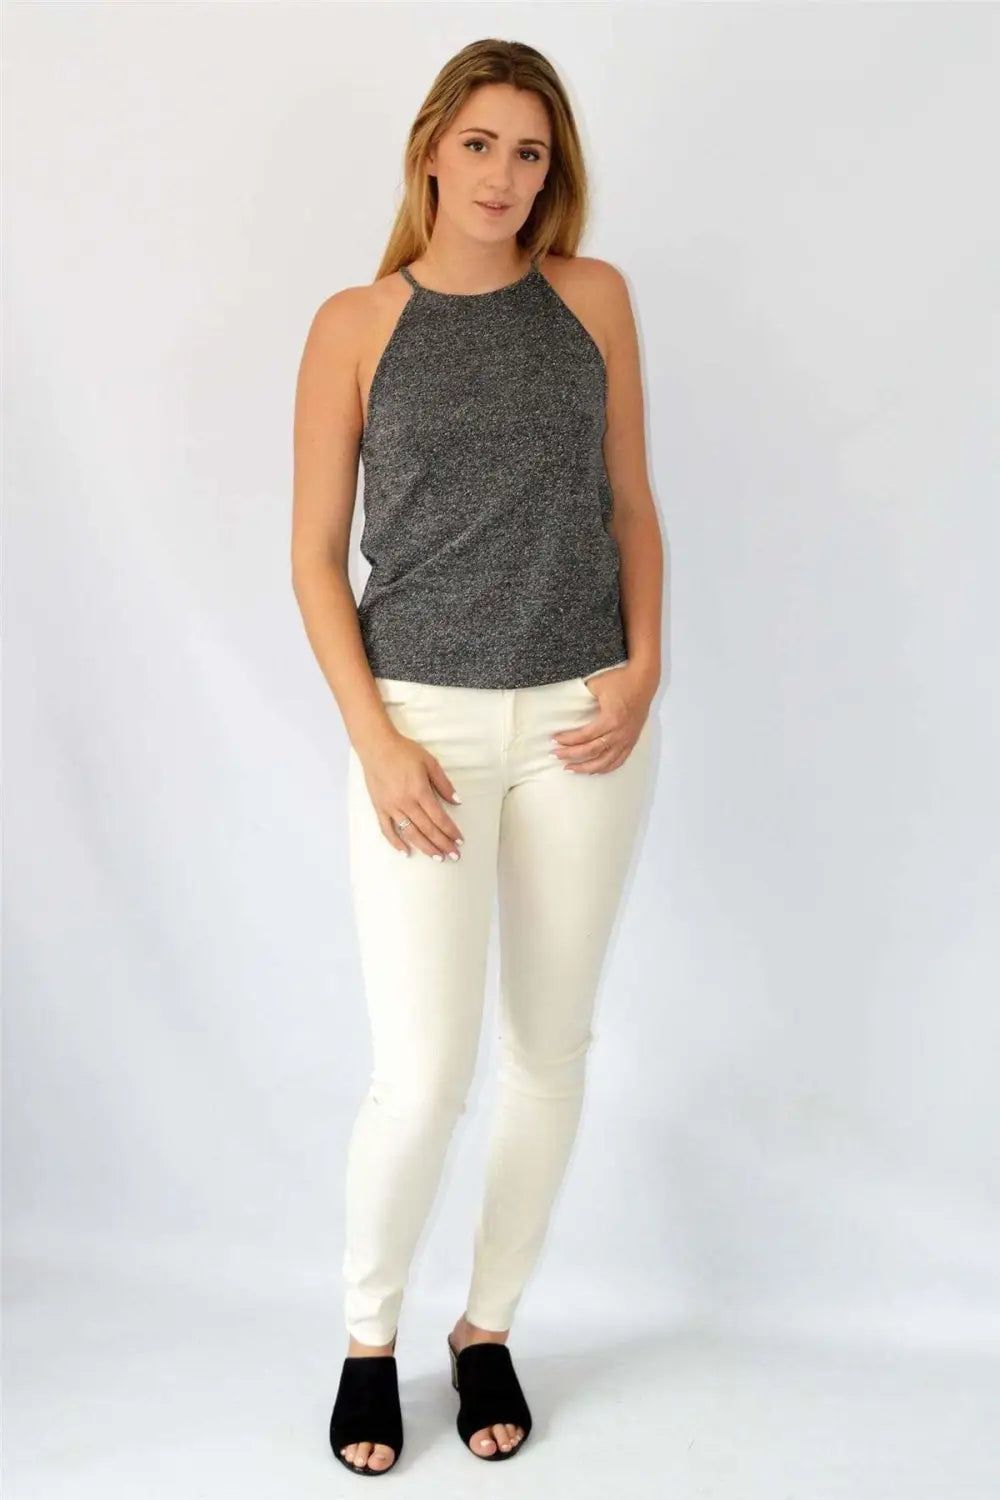 Urban Outfitters Sparkle Party Top